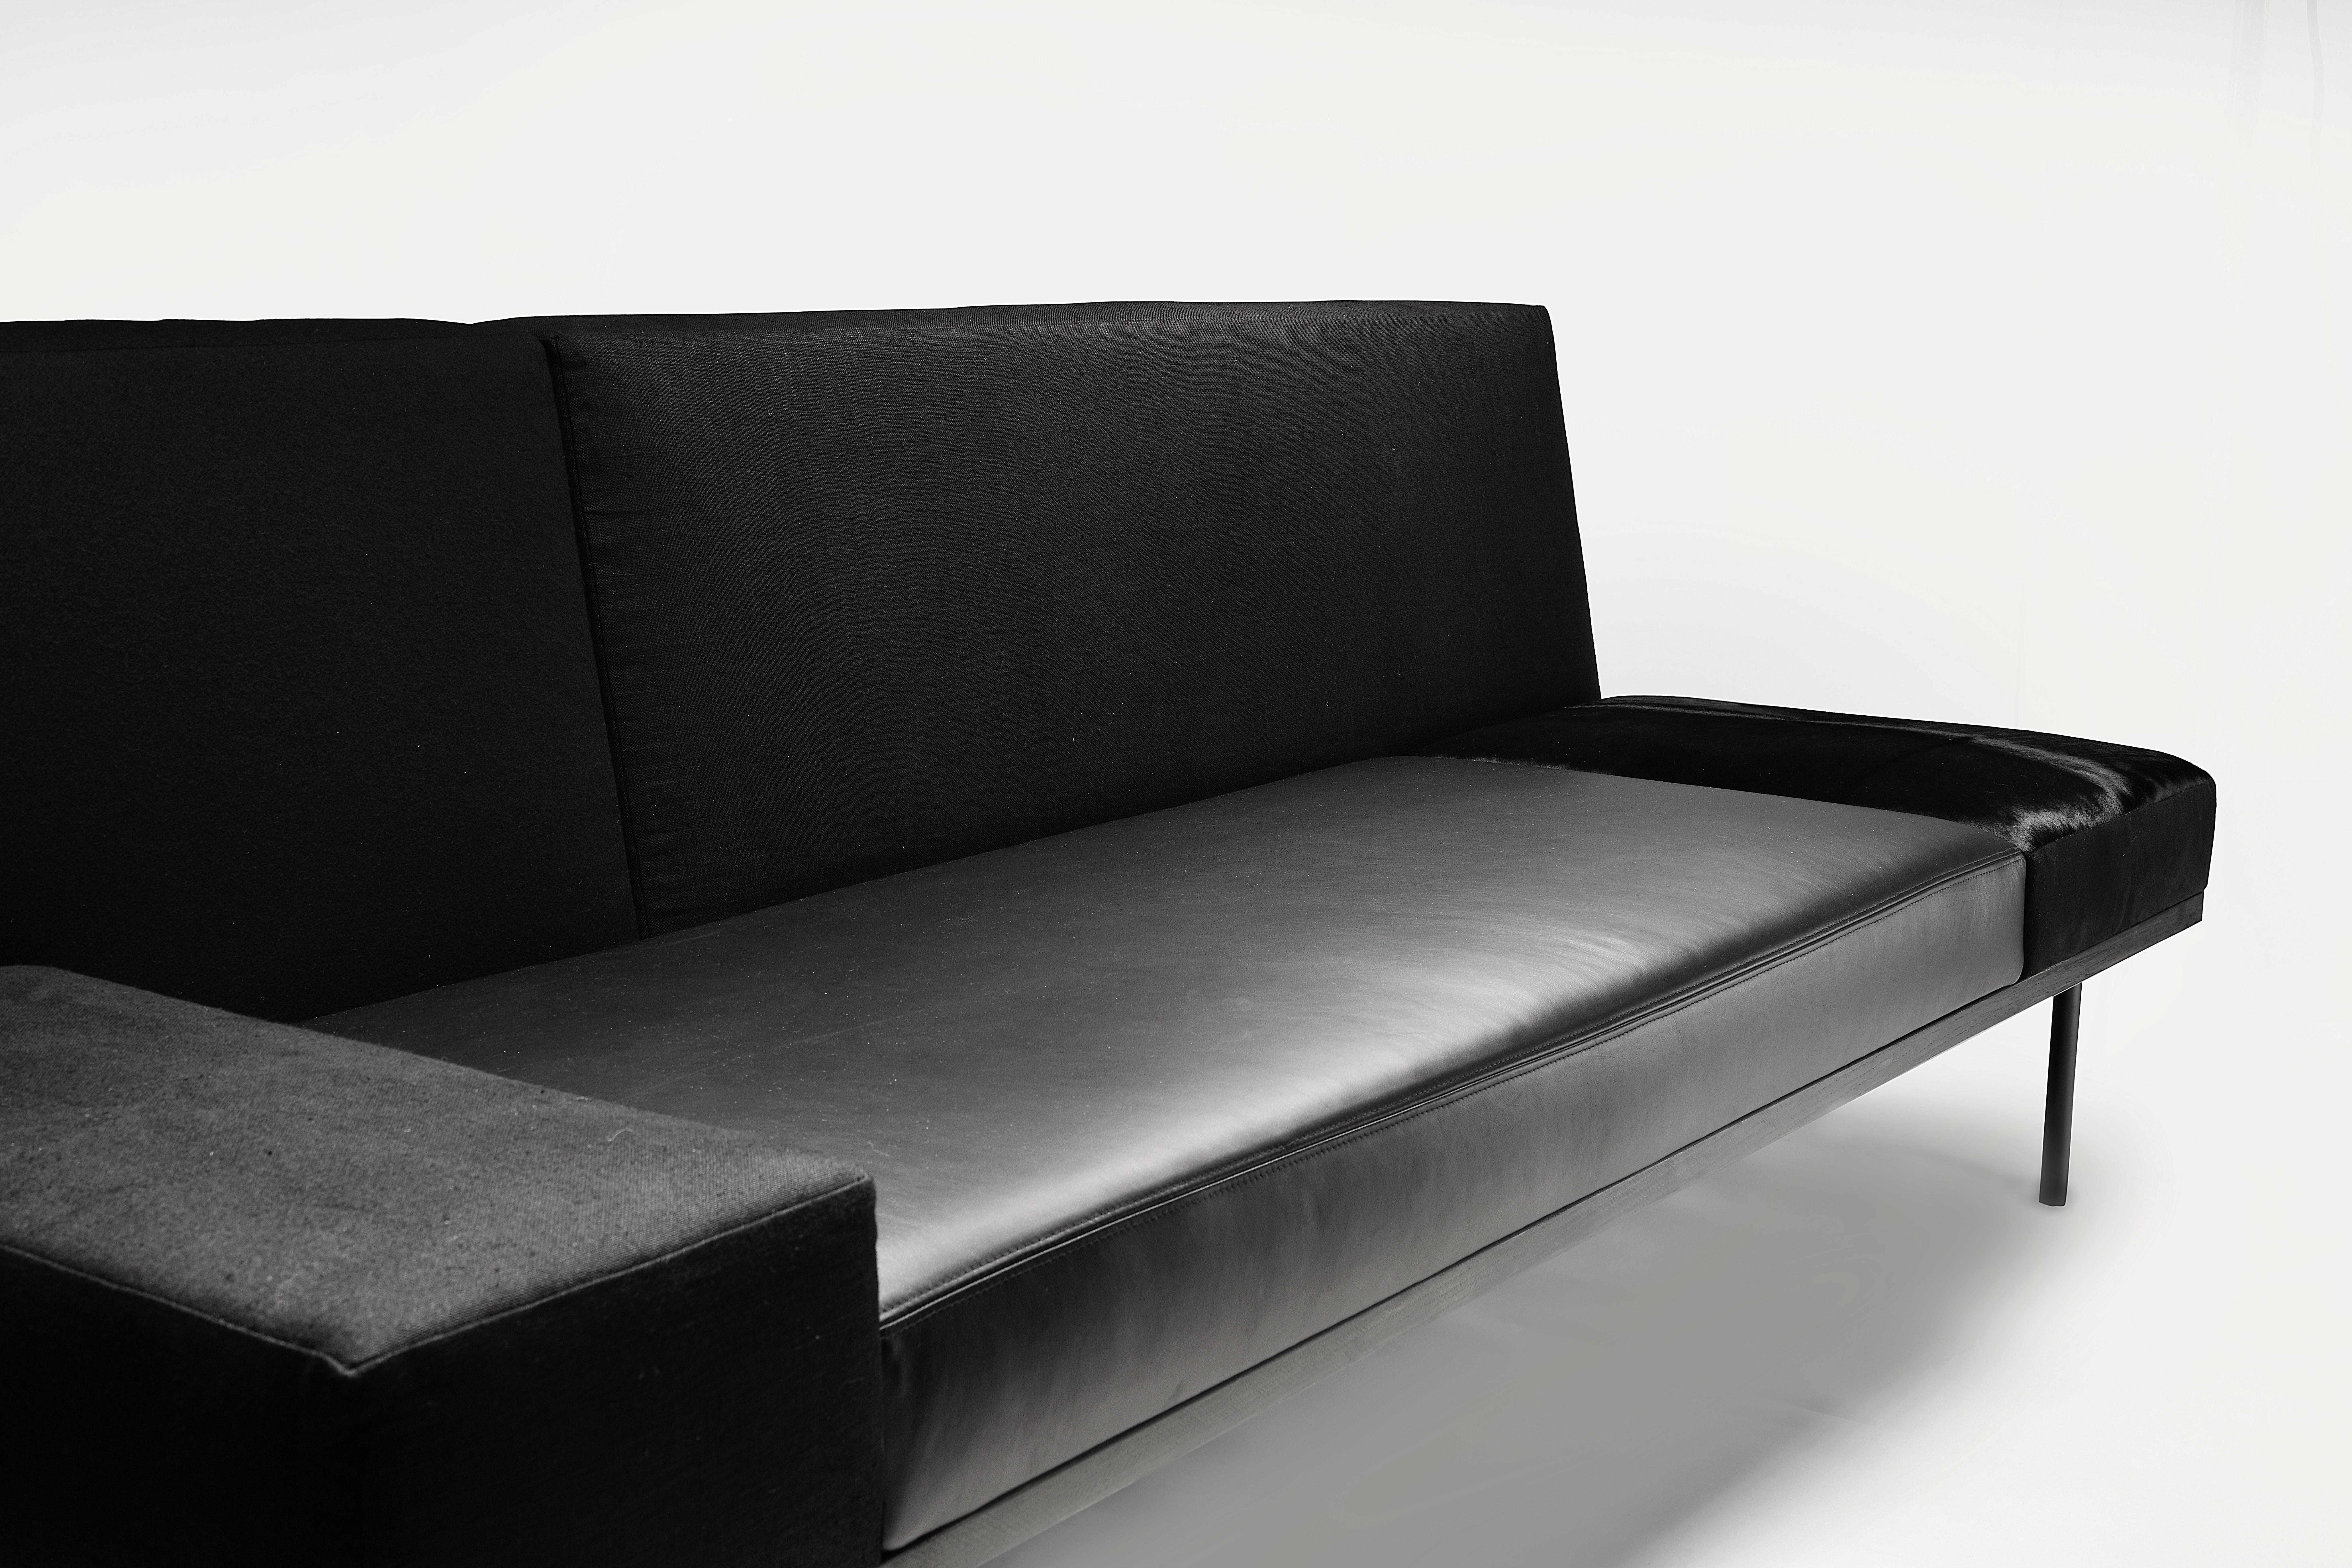 Black Kaleidoscope long sofa: An open composition seating unit over 6’ long is created by a combination of 7 different materials (metal, ashwood, linen, wool, leather, suede, and calf hide), a refined juxtaposition of proportion and